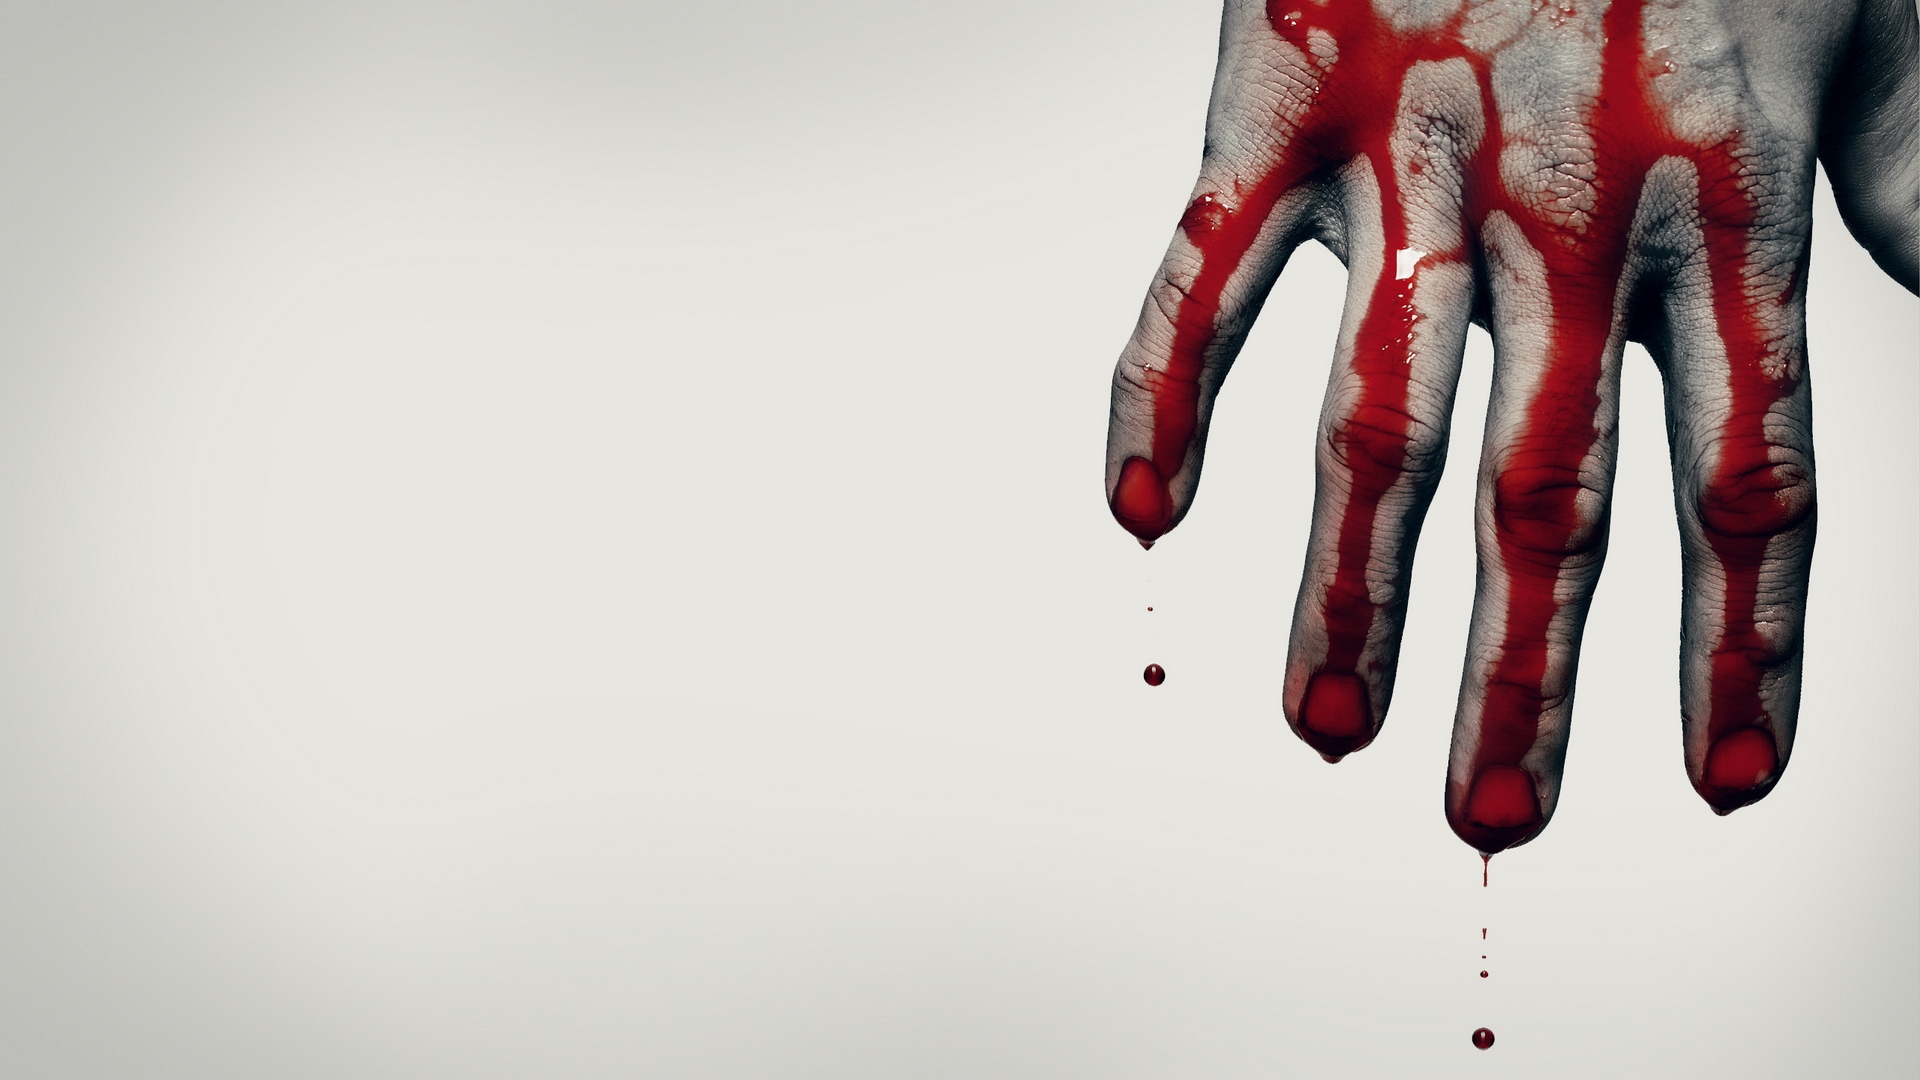 Wallpaper red blood brush flesh hand scary finger arm close up x